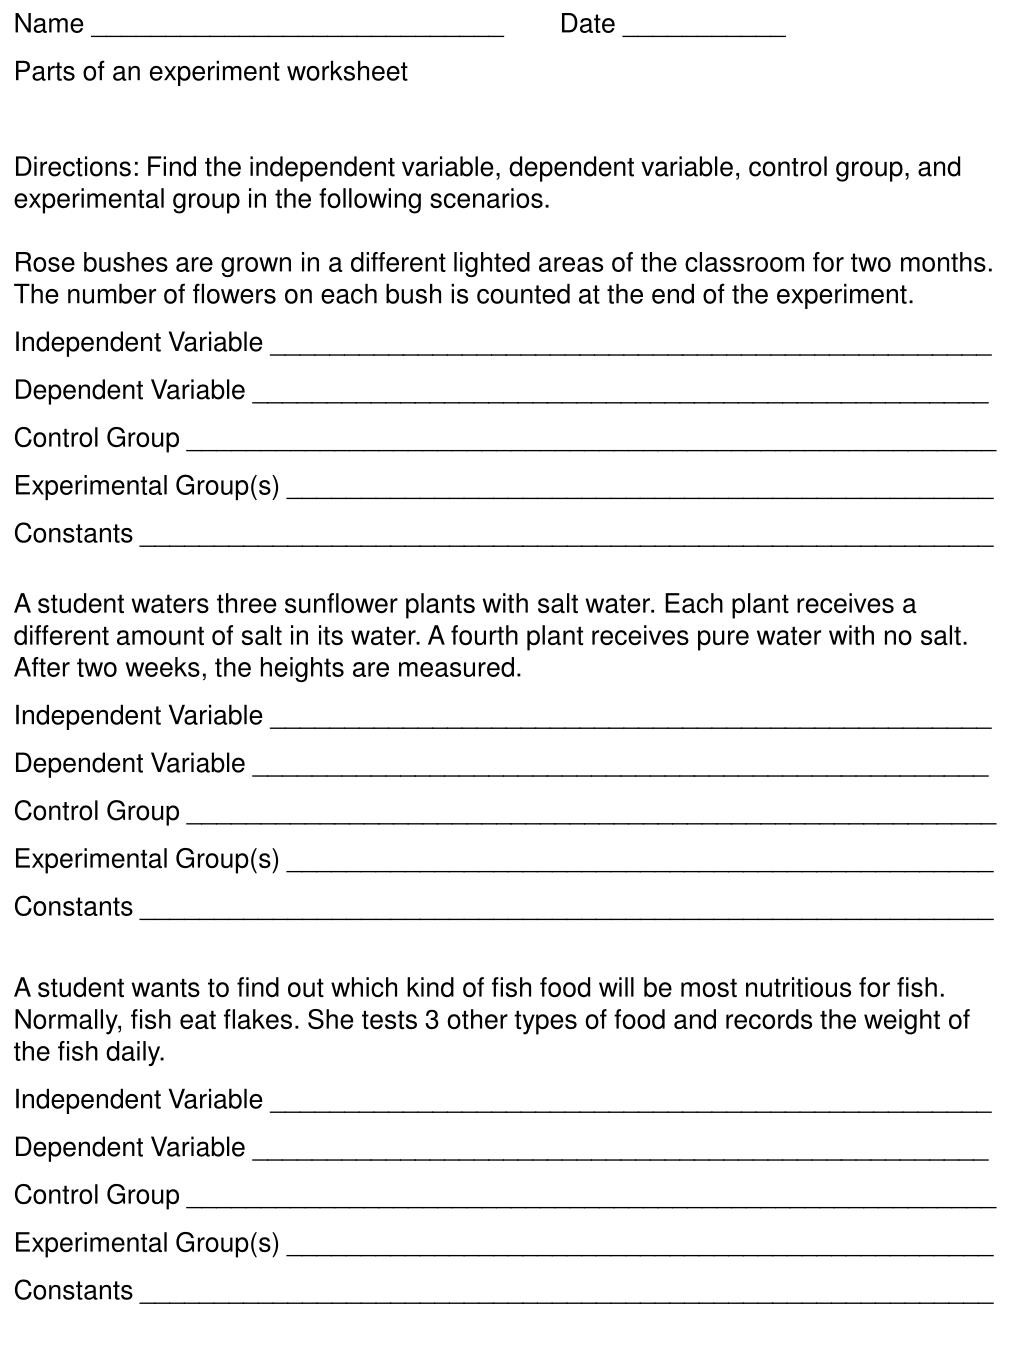 Identifying Variables Worksheet Answers Ppt Name Date Parts Of An Experiment Worksheet